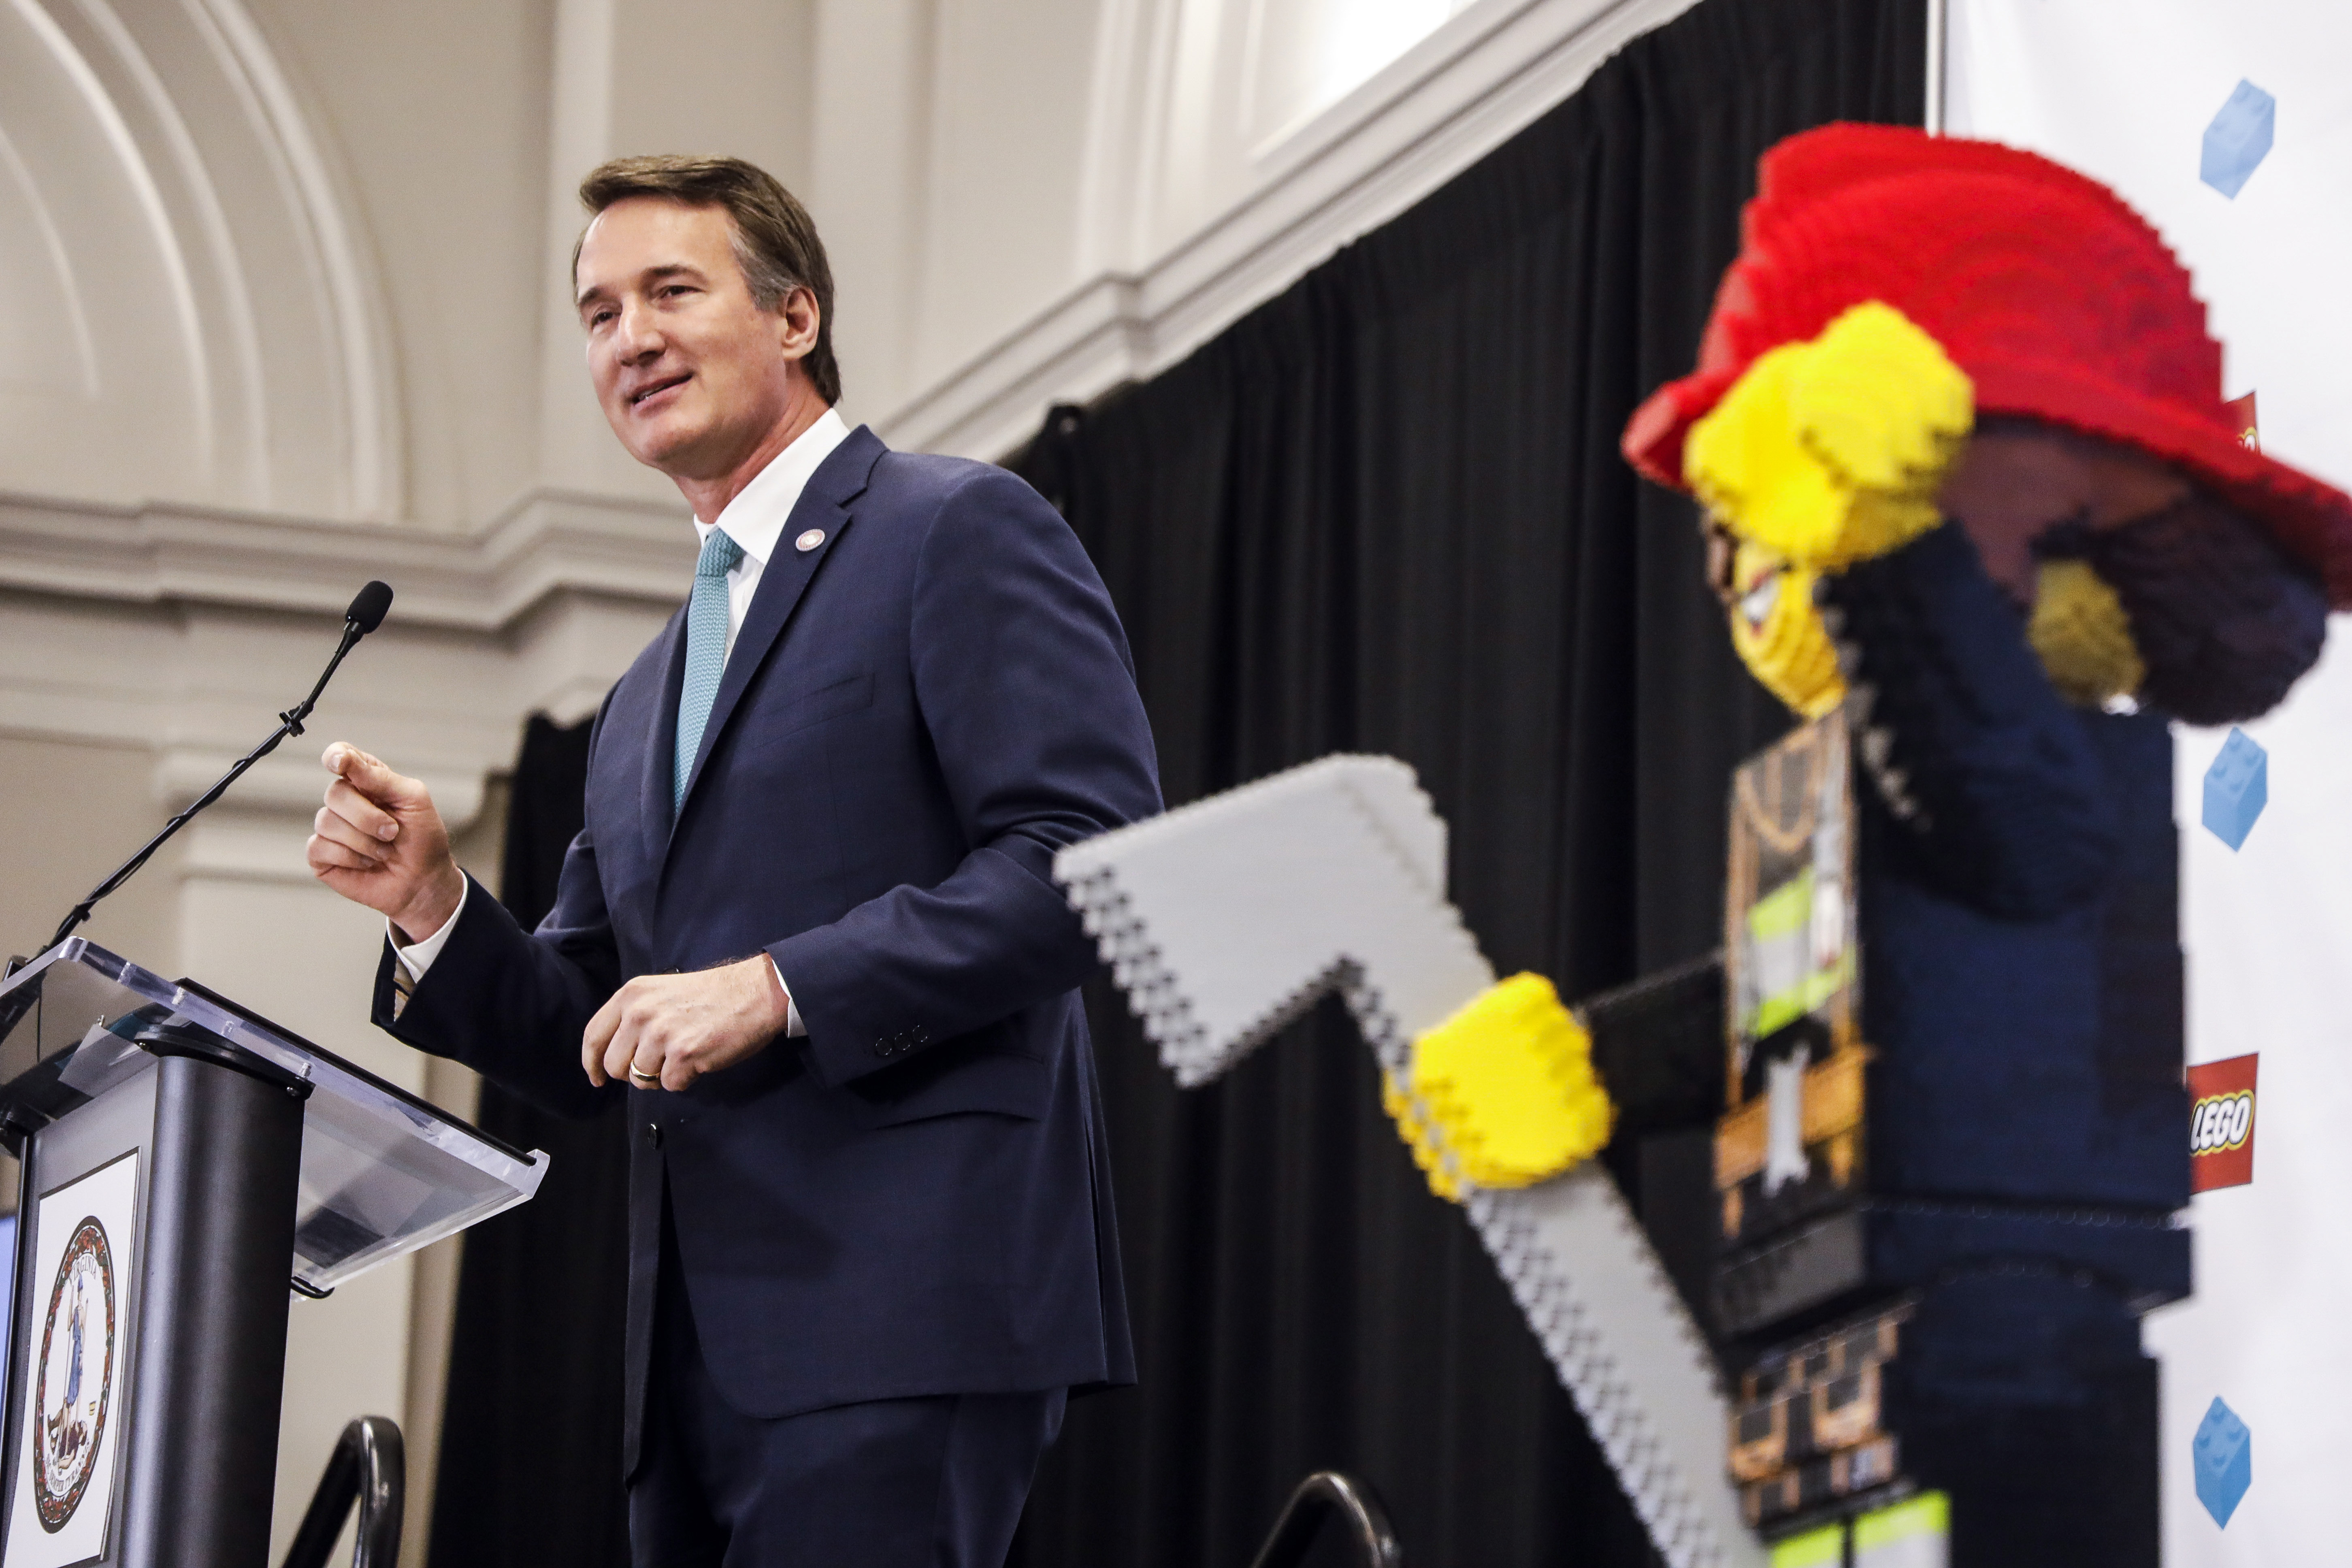 Lego factory (a real bring nearly 2,000 to Virginia - Washington Times